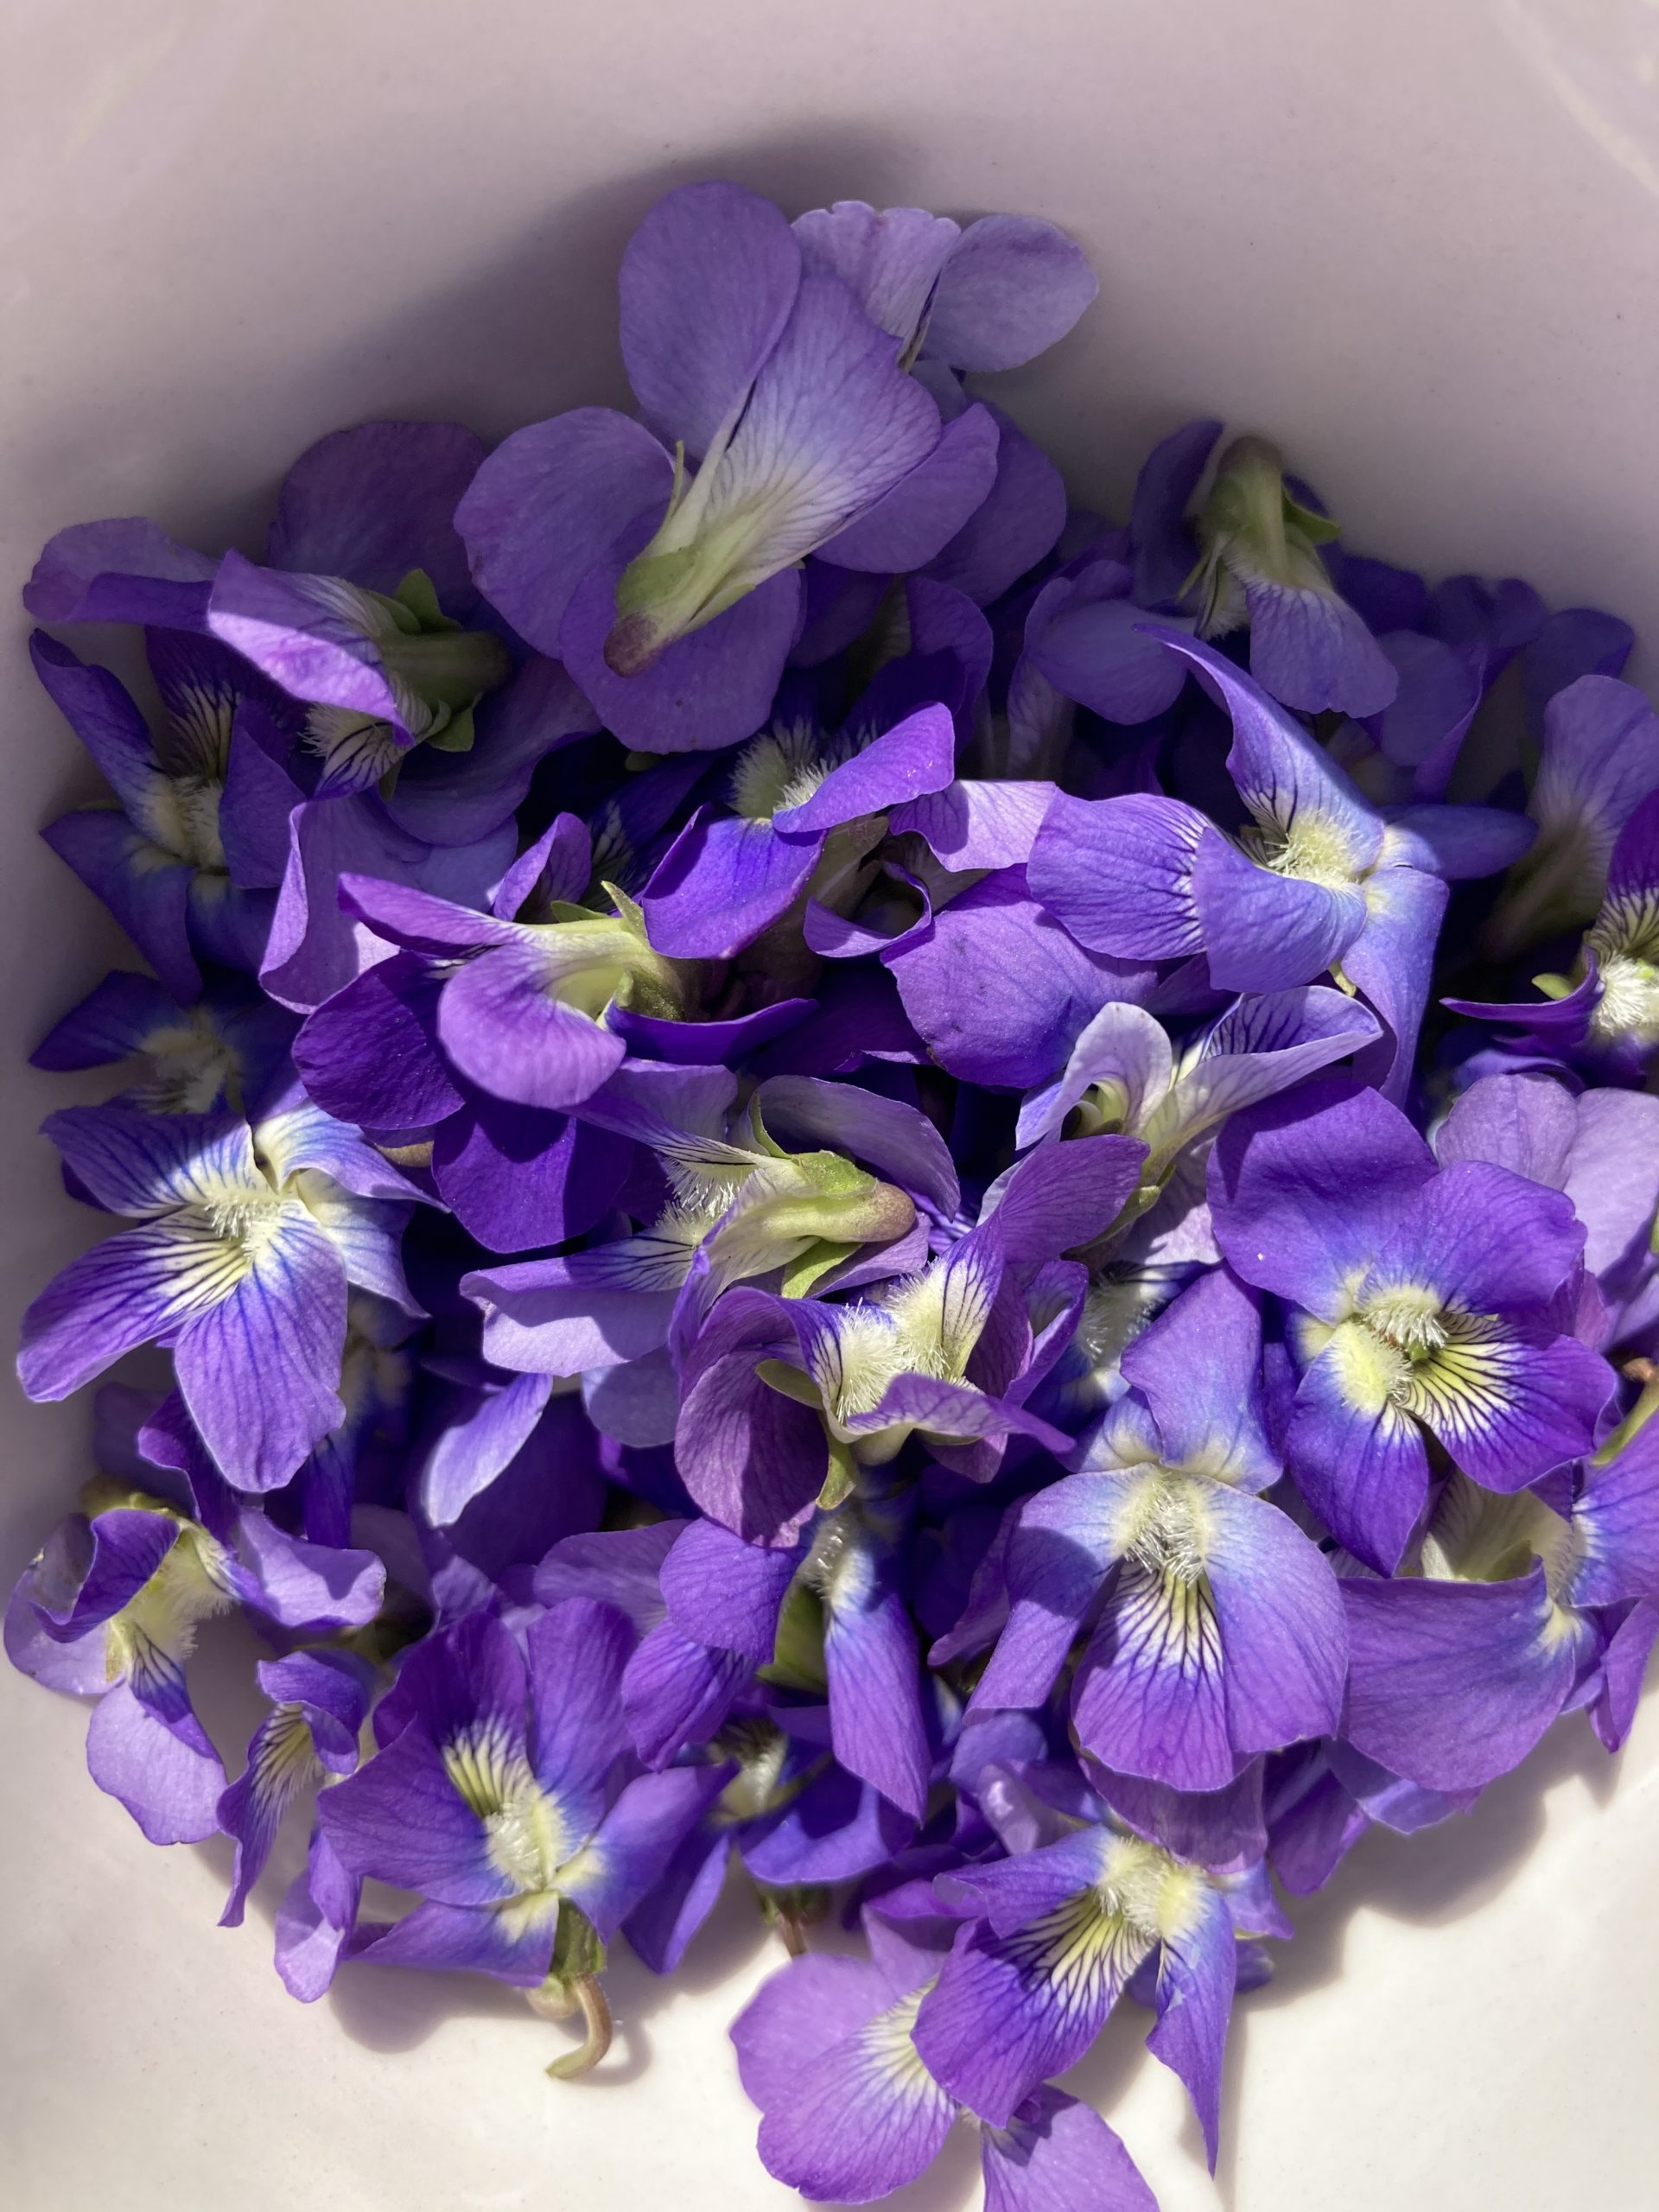 A picture of a heap of flowers from violets aka violas - intensely purple with pale yellow centers